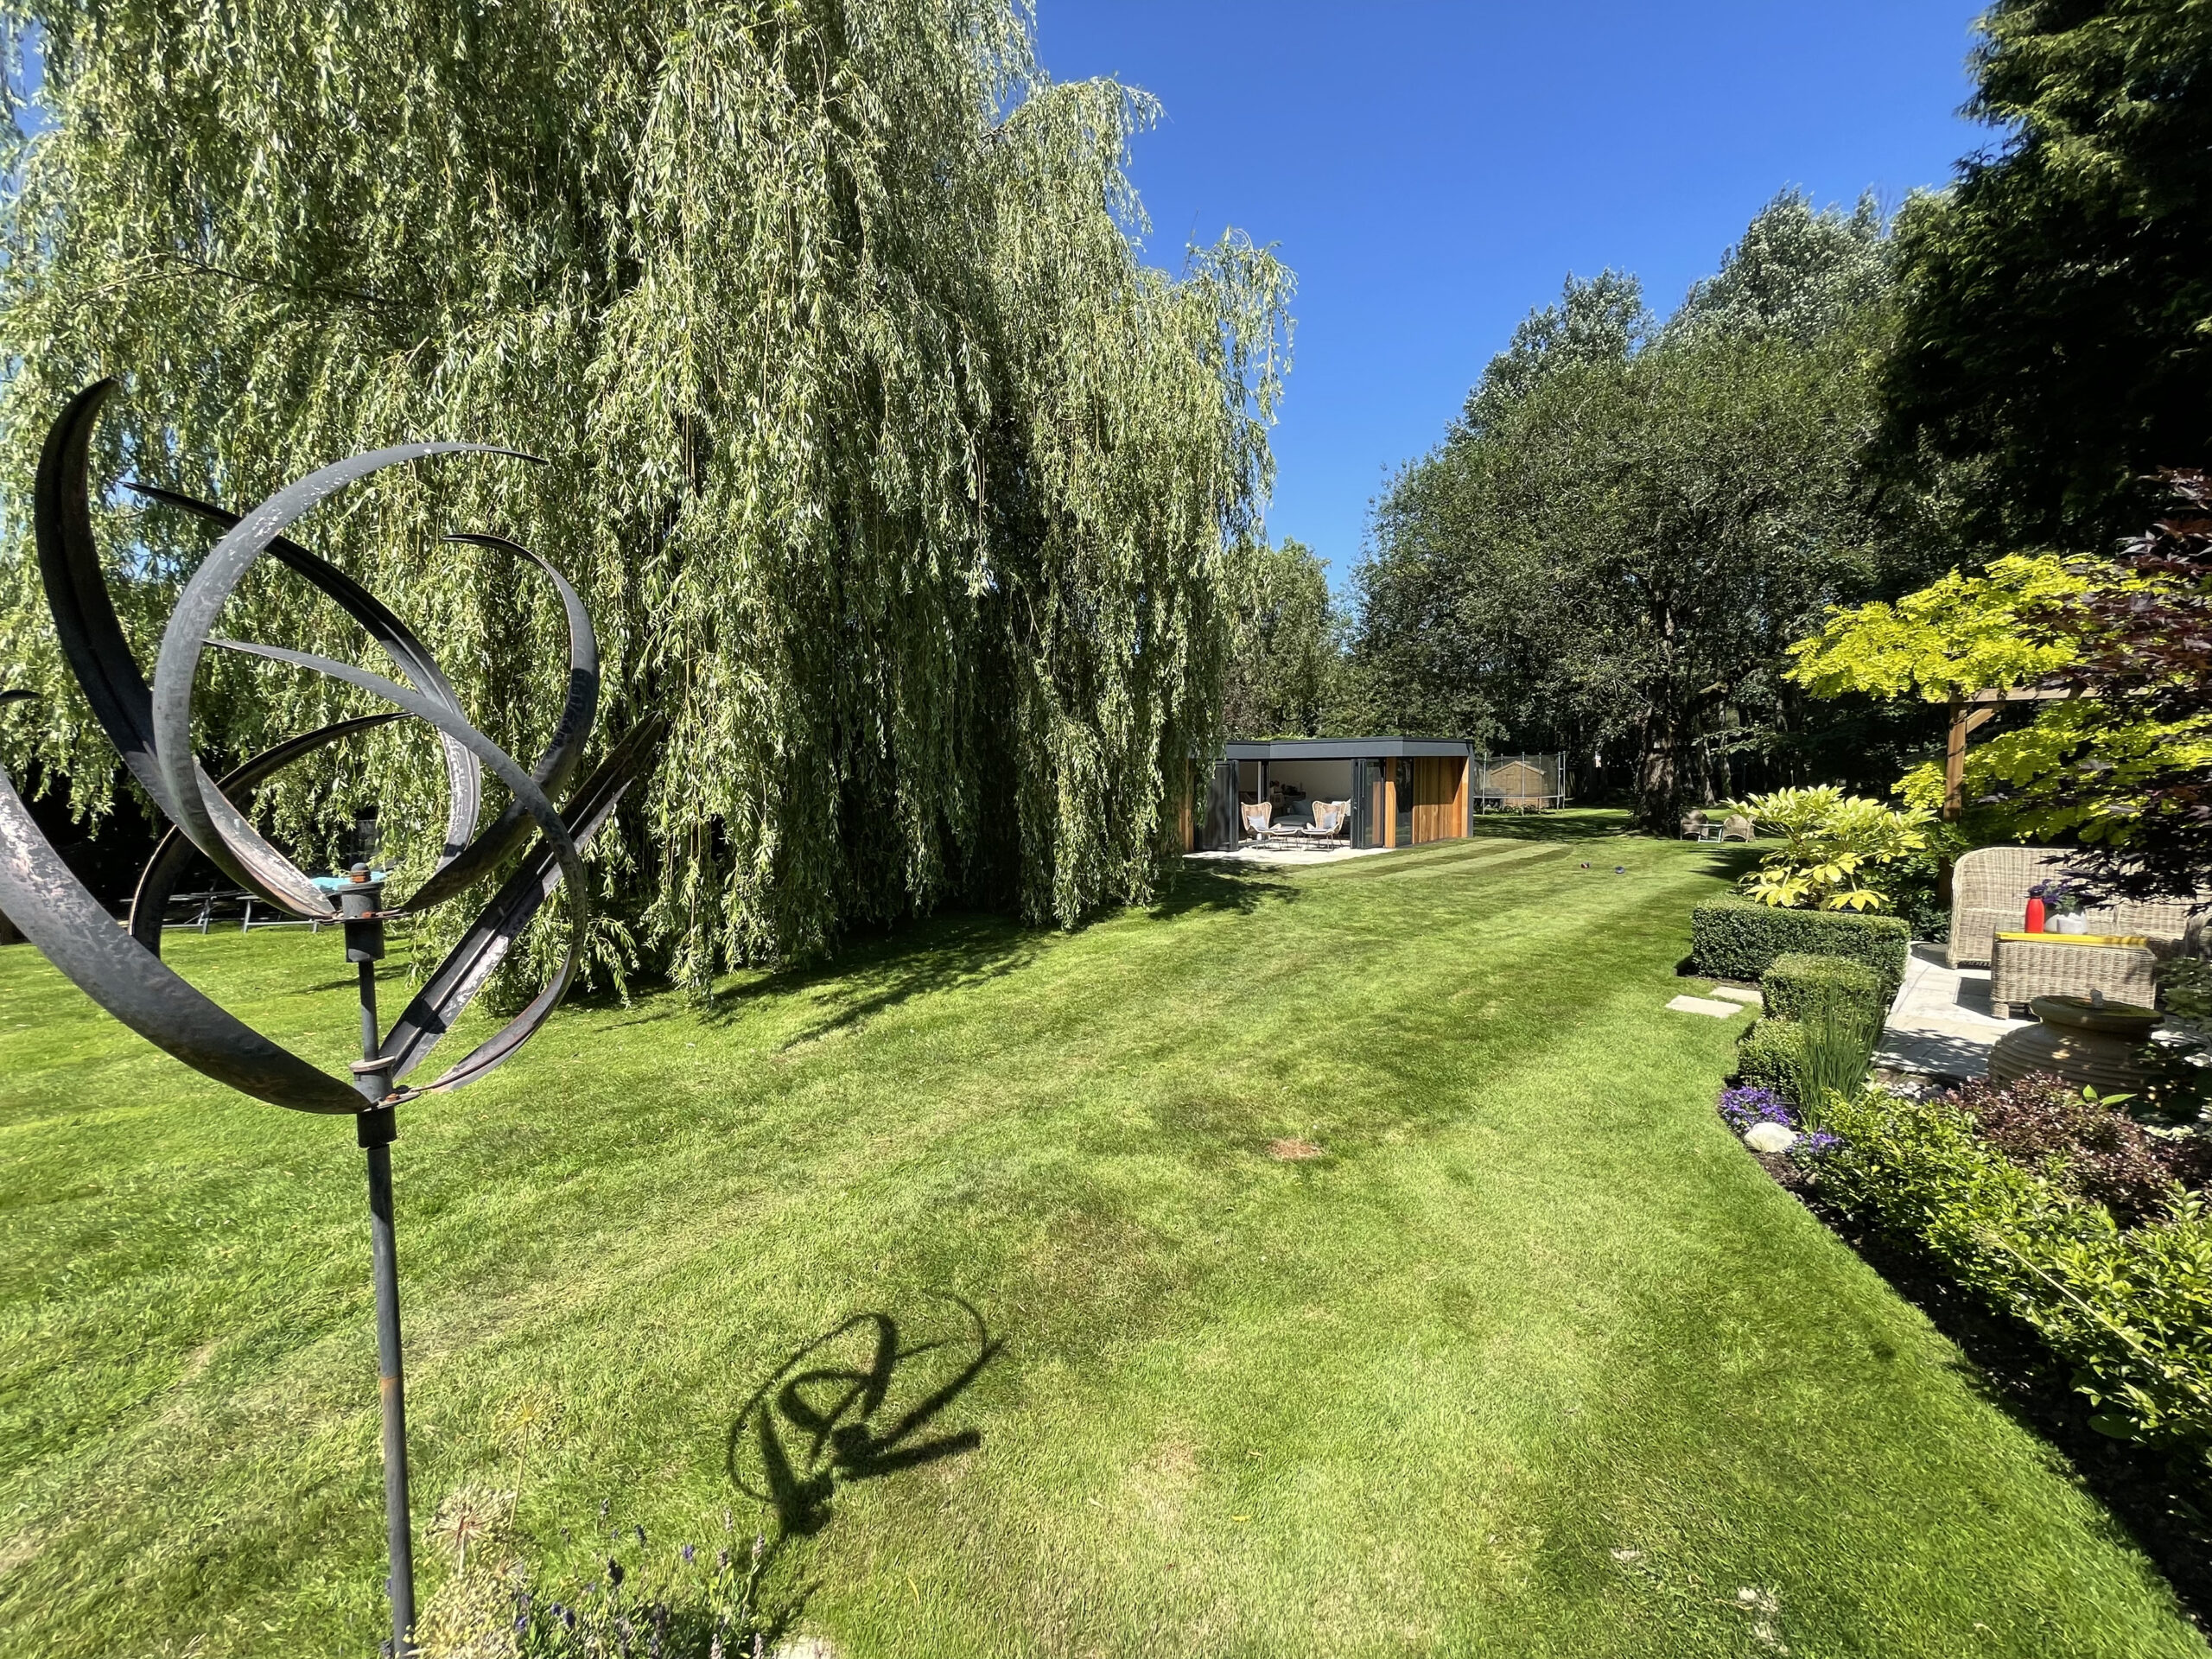 Long shot of a sunny garden with a metal ornament in the foreground, a willow tree and outdoor seating area in the middle ground, and a Vivid Green L-shaped western red cedar clad garden room in the background.